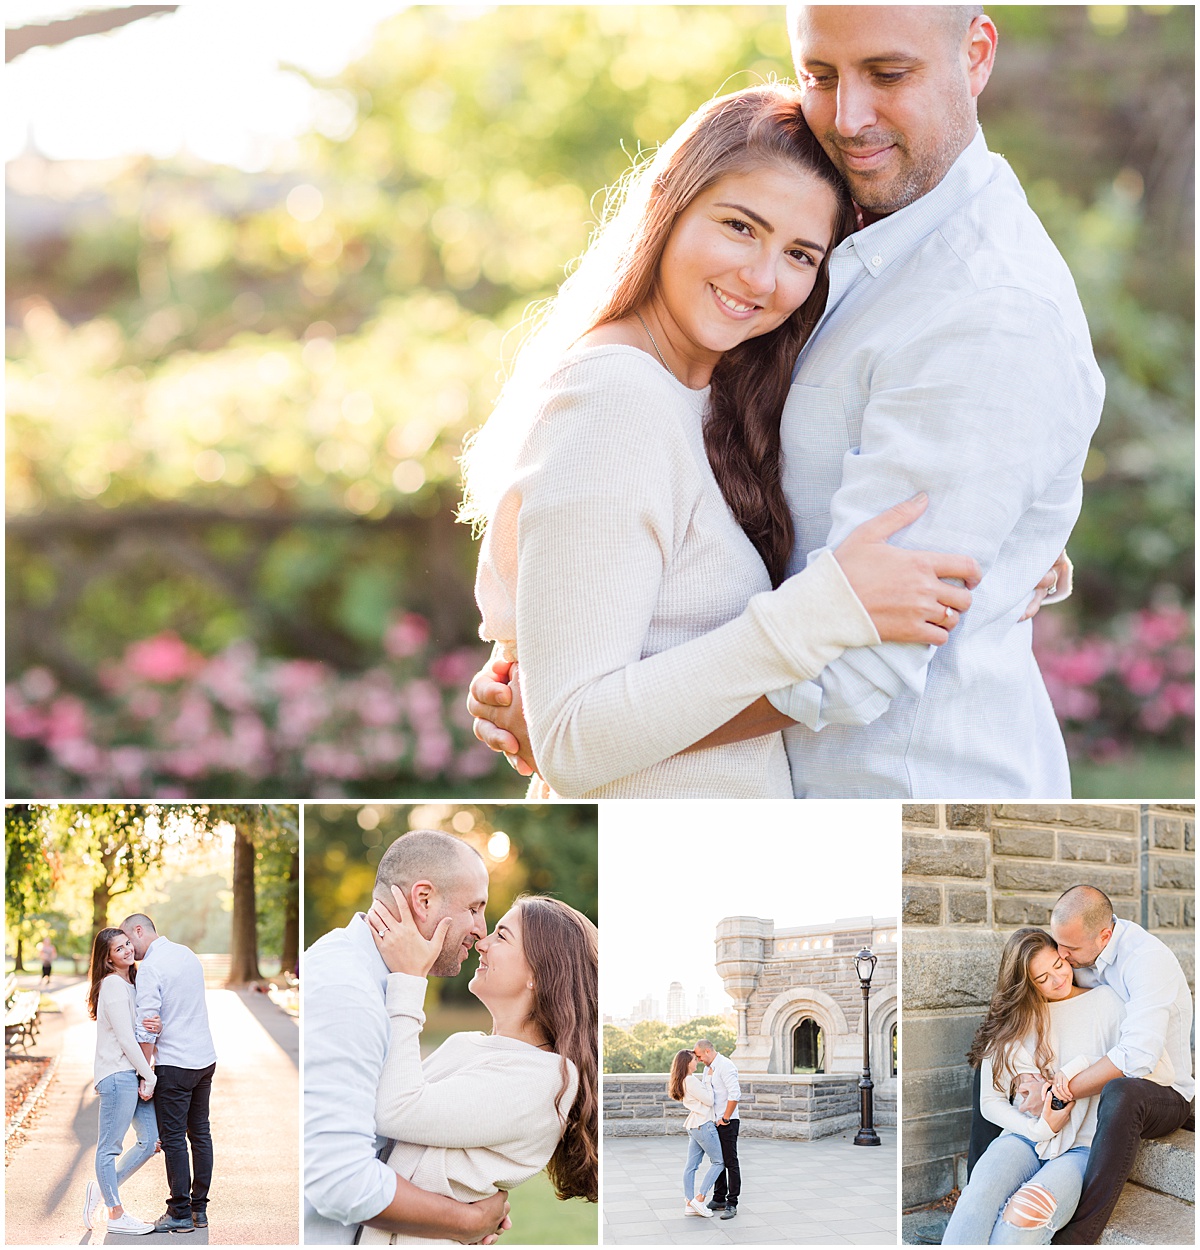 Sunrise engagement session at Belvedere Castle in Central Park NYC